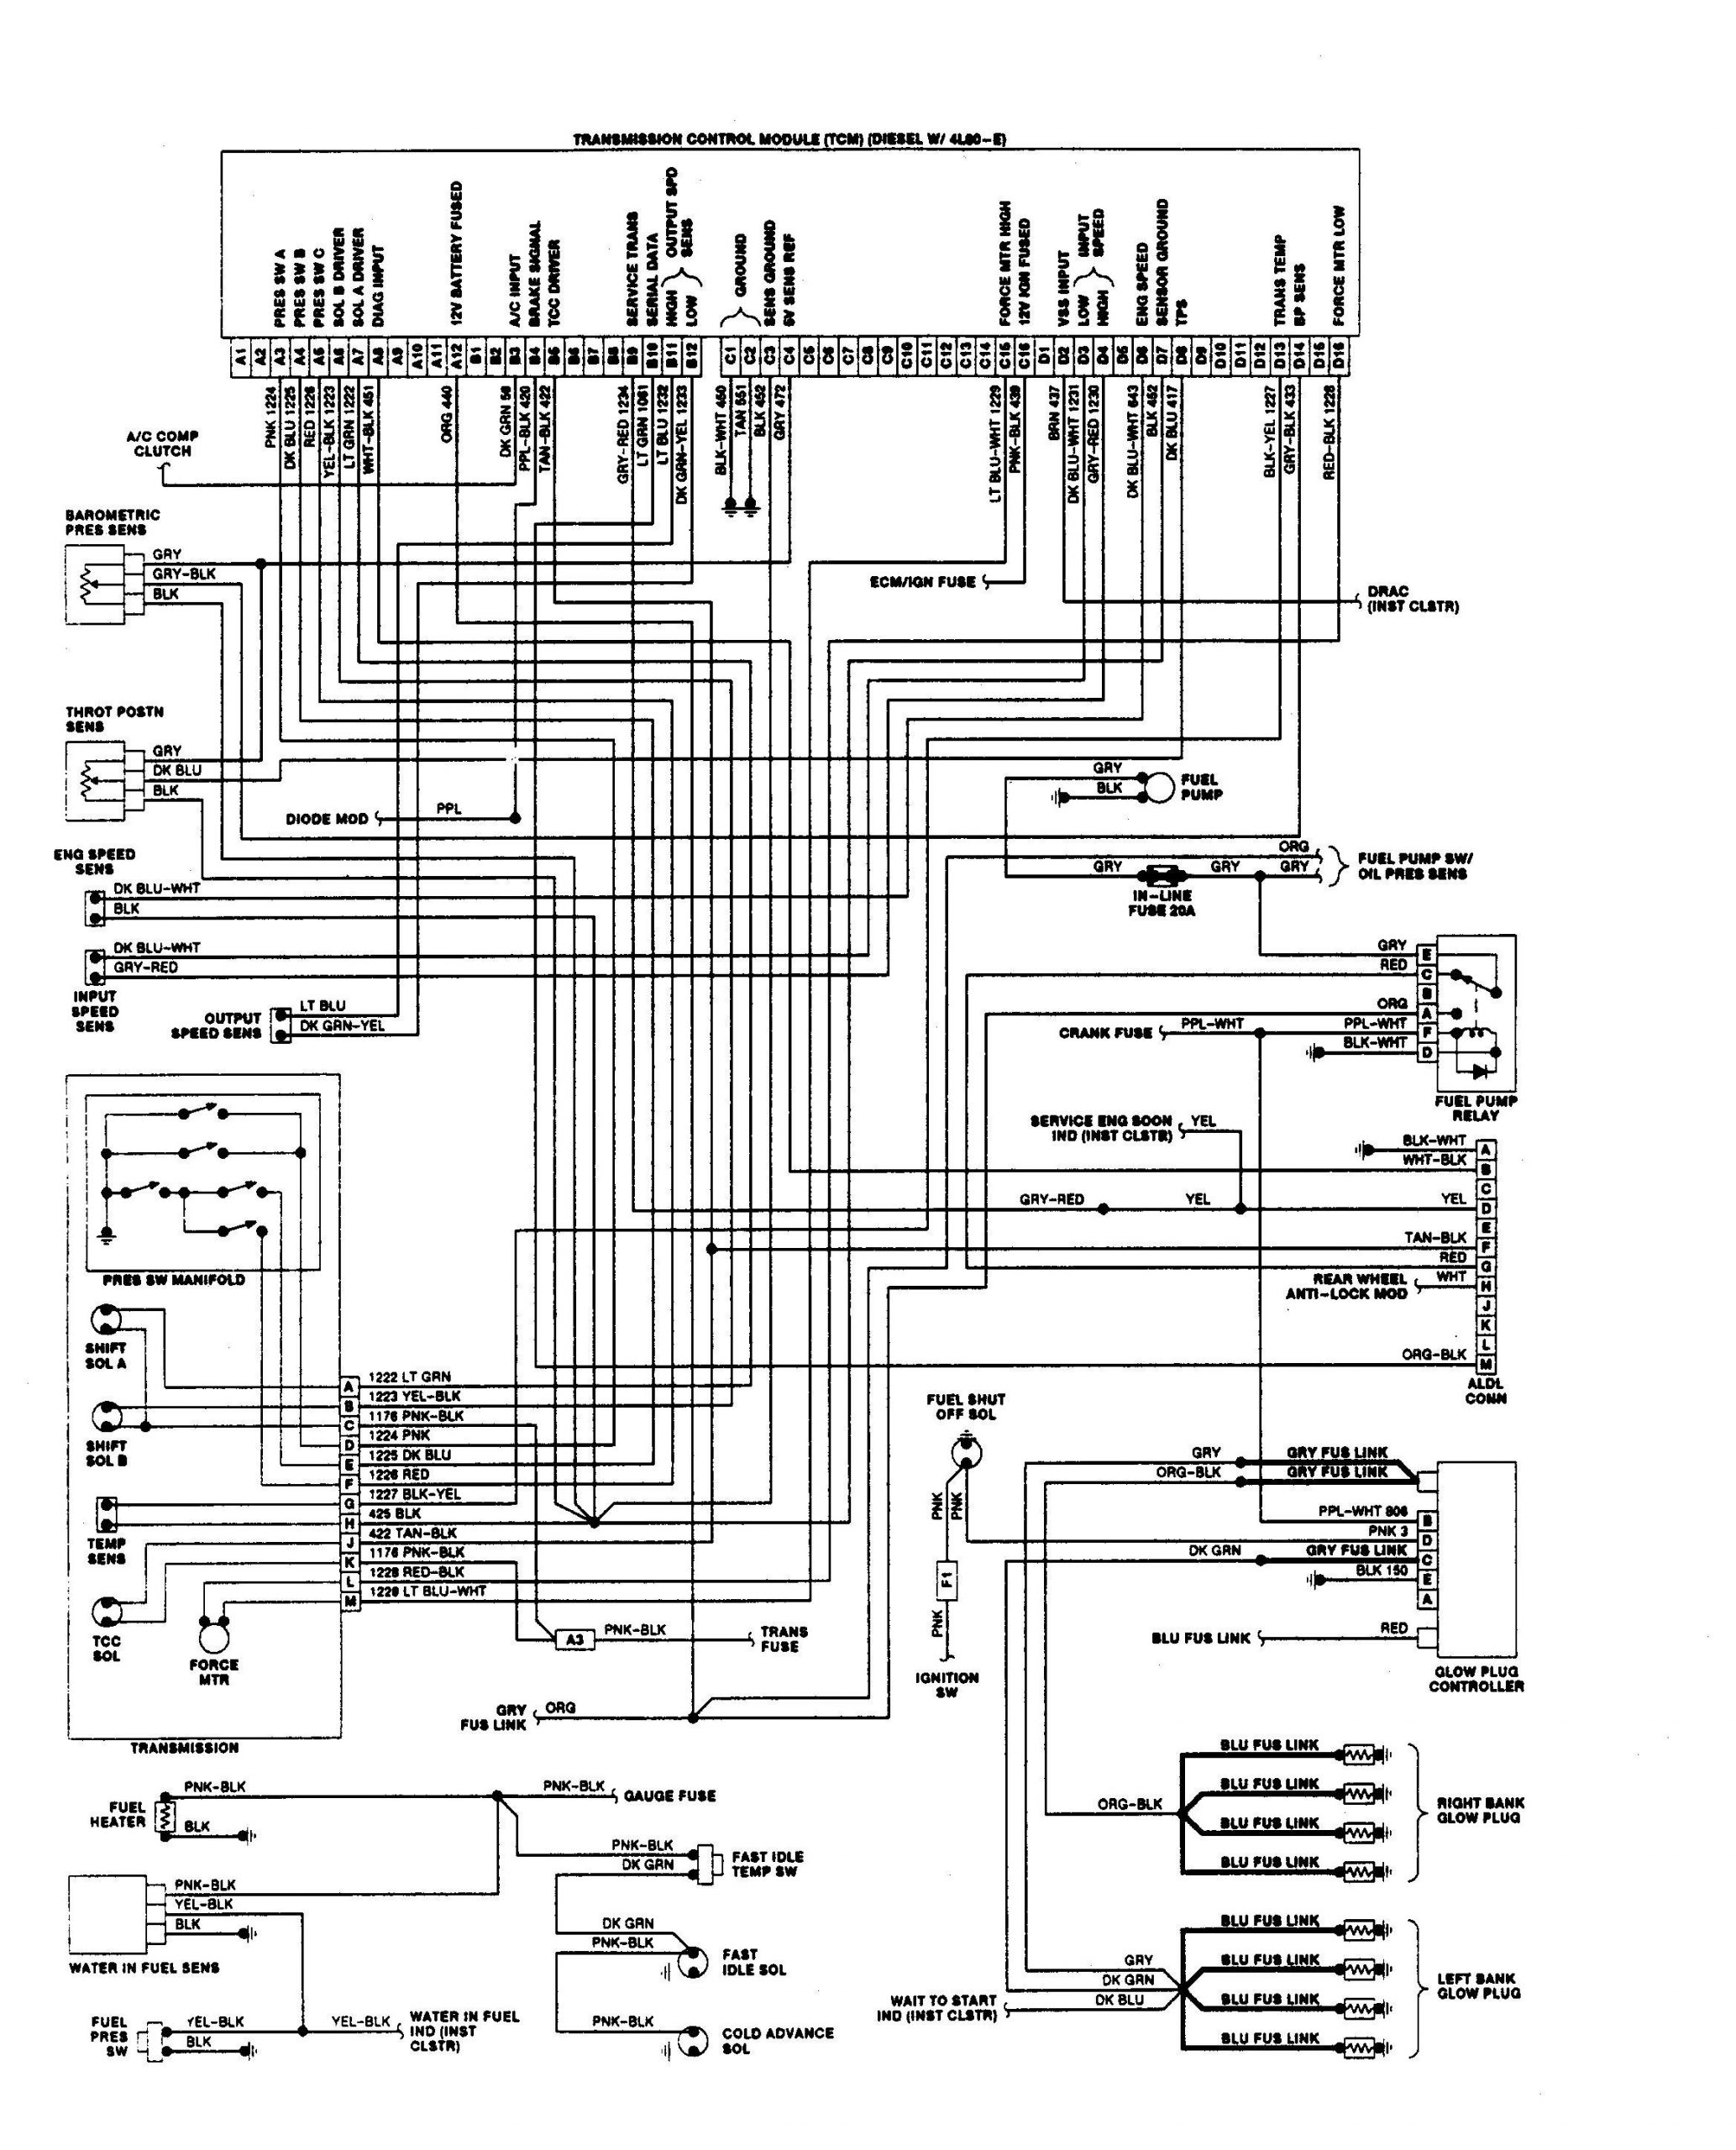 1991 Chevy Truck Wiring Schematic I Like to Know How to Get Electric Wiring for the Chevy 6.2 Diesel Of 1991 Chevy Truck Wiring Schematic